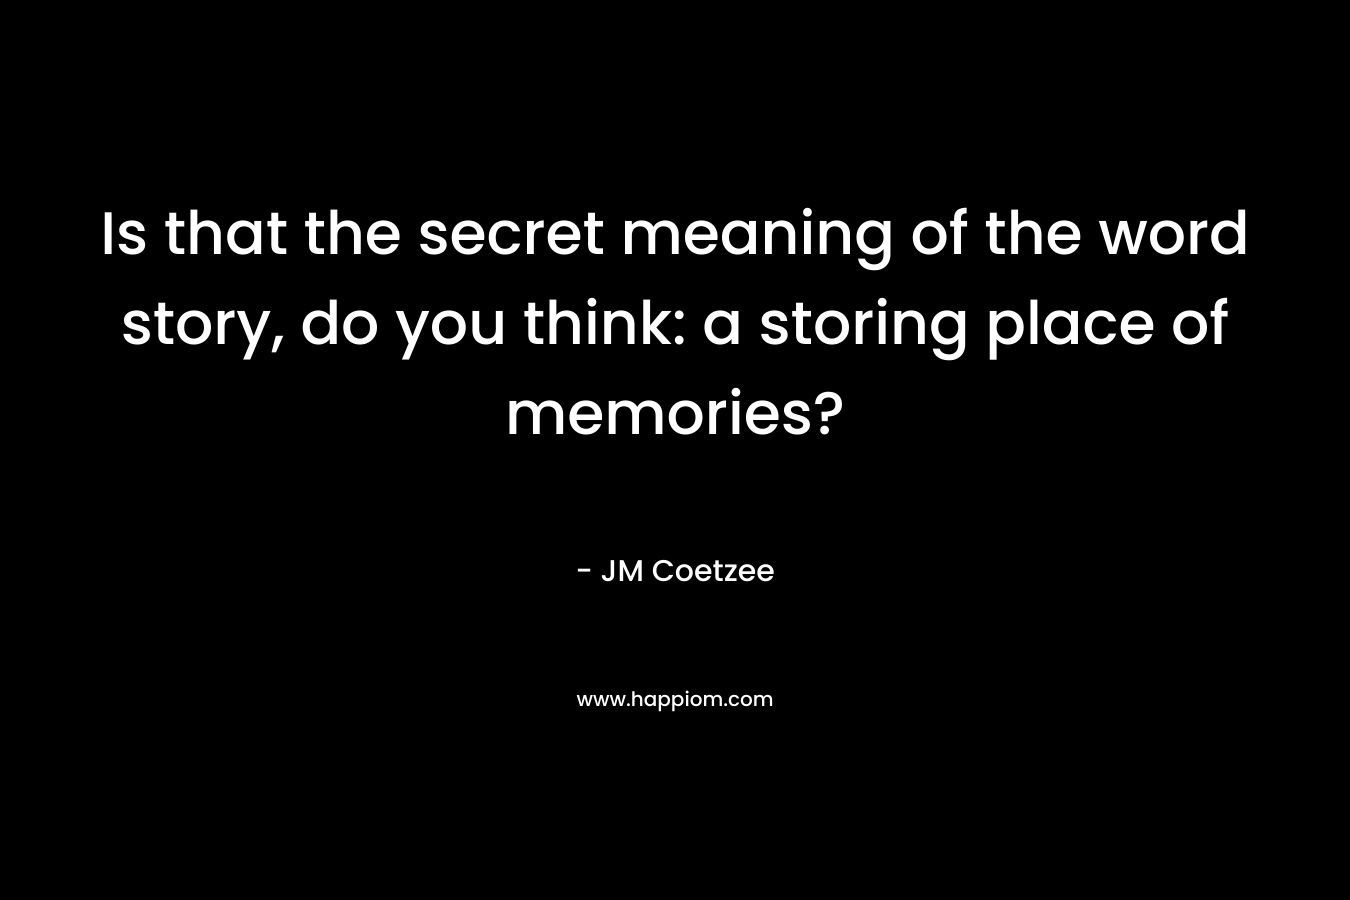 Is that the secret meaning of the word story, do you think: a storing place of memories? – JM Coetzee